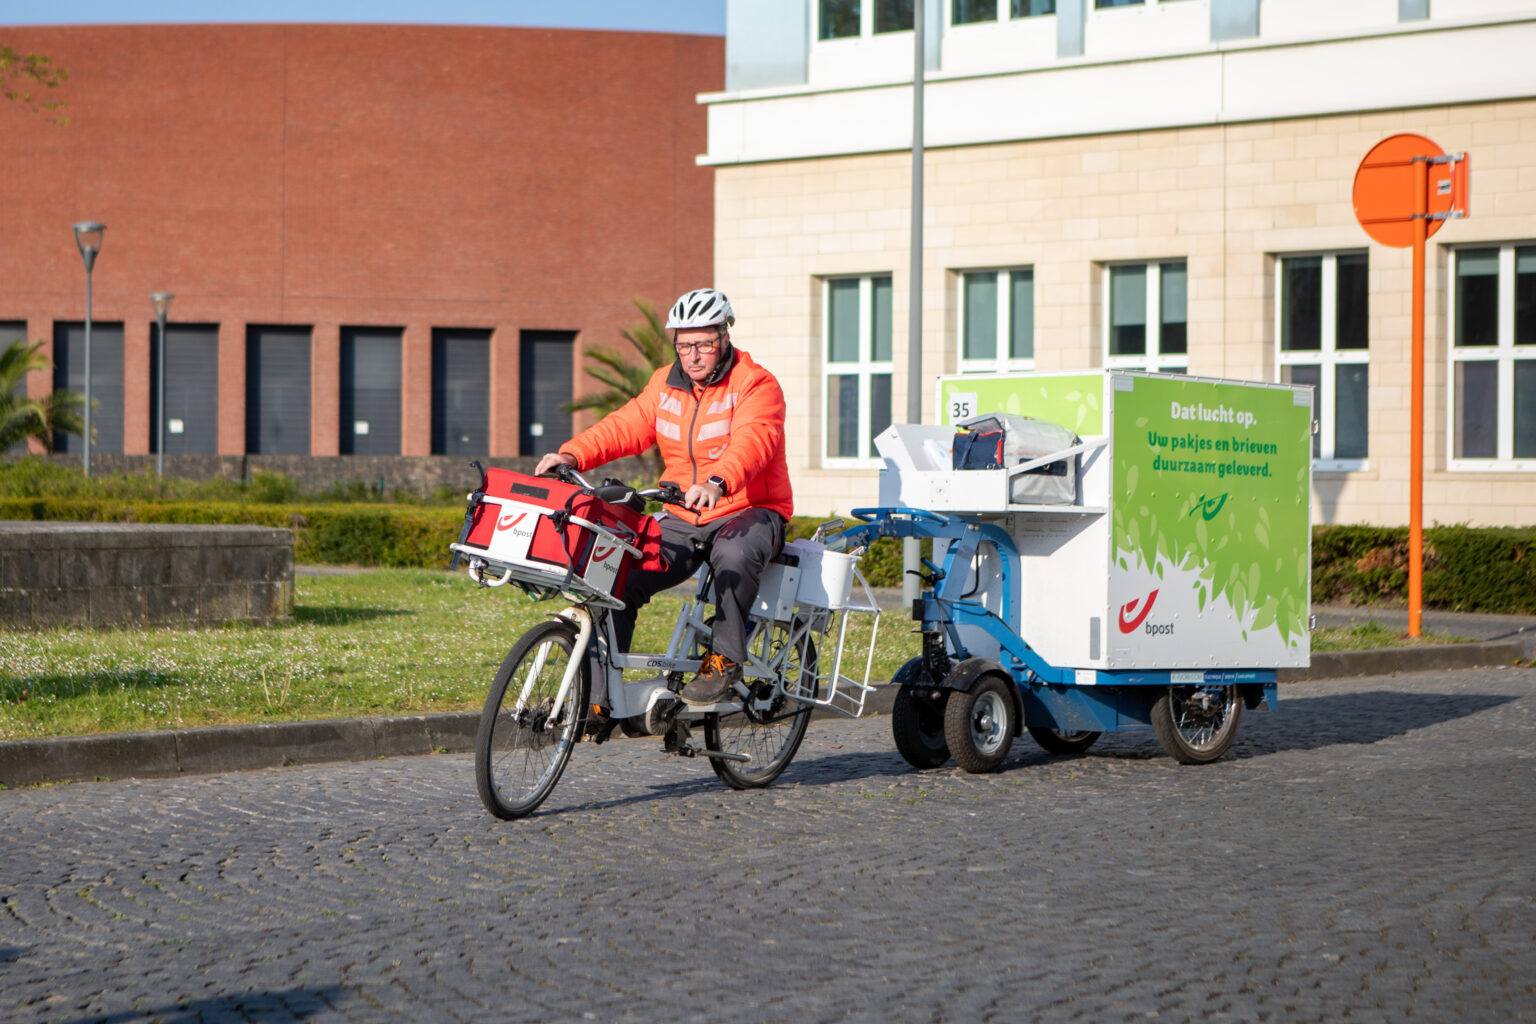 bpost expands sustainable deliveries to all of Leuven - Parcel and ...